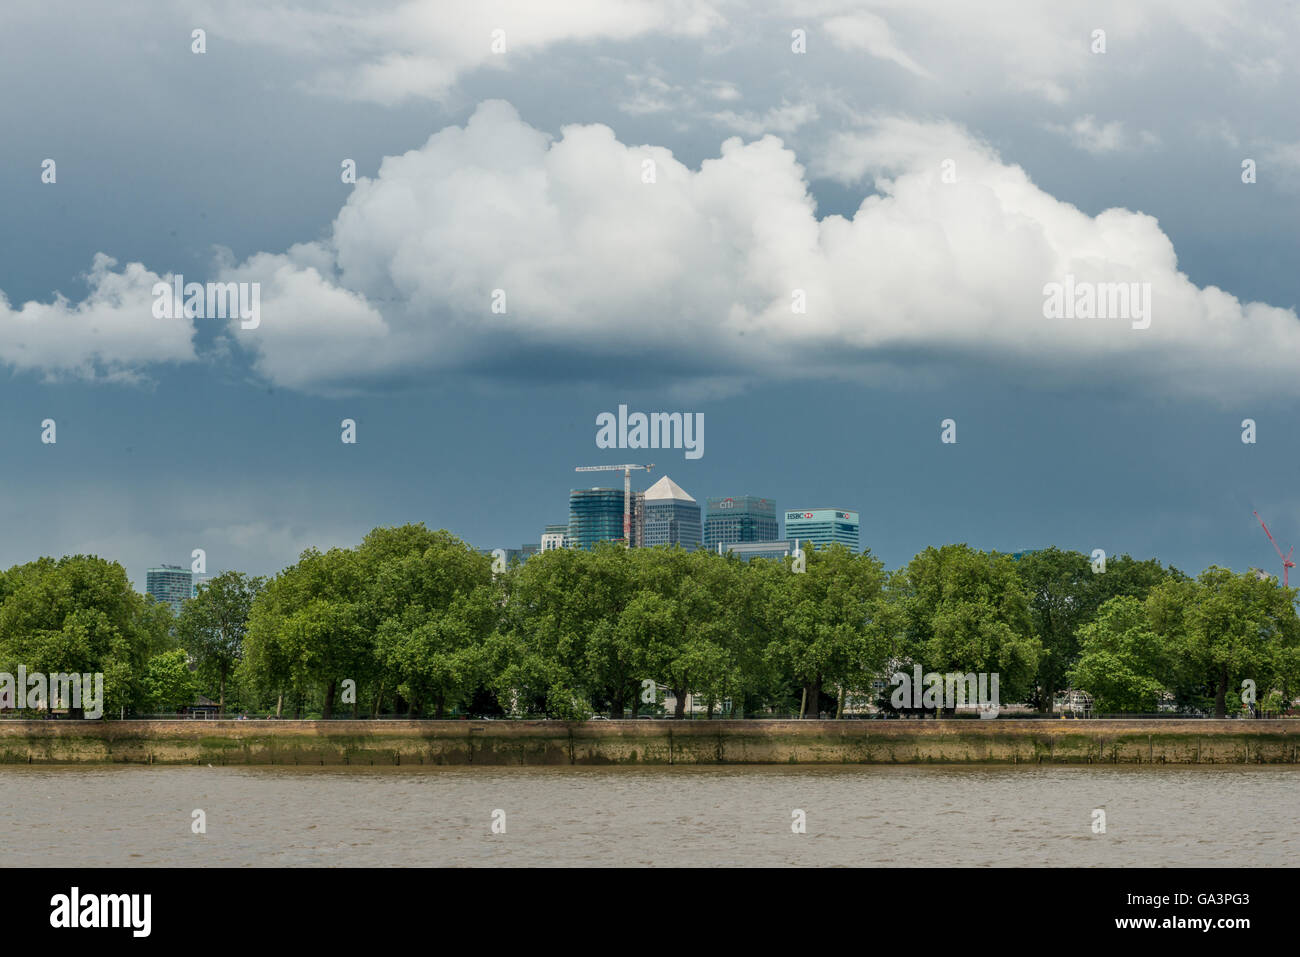 London, United Kingdom - June 25, 2016: View from Greenwich over Canary Wharf: skyscrapers, trees and moody clouds Stock Photo